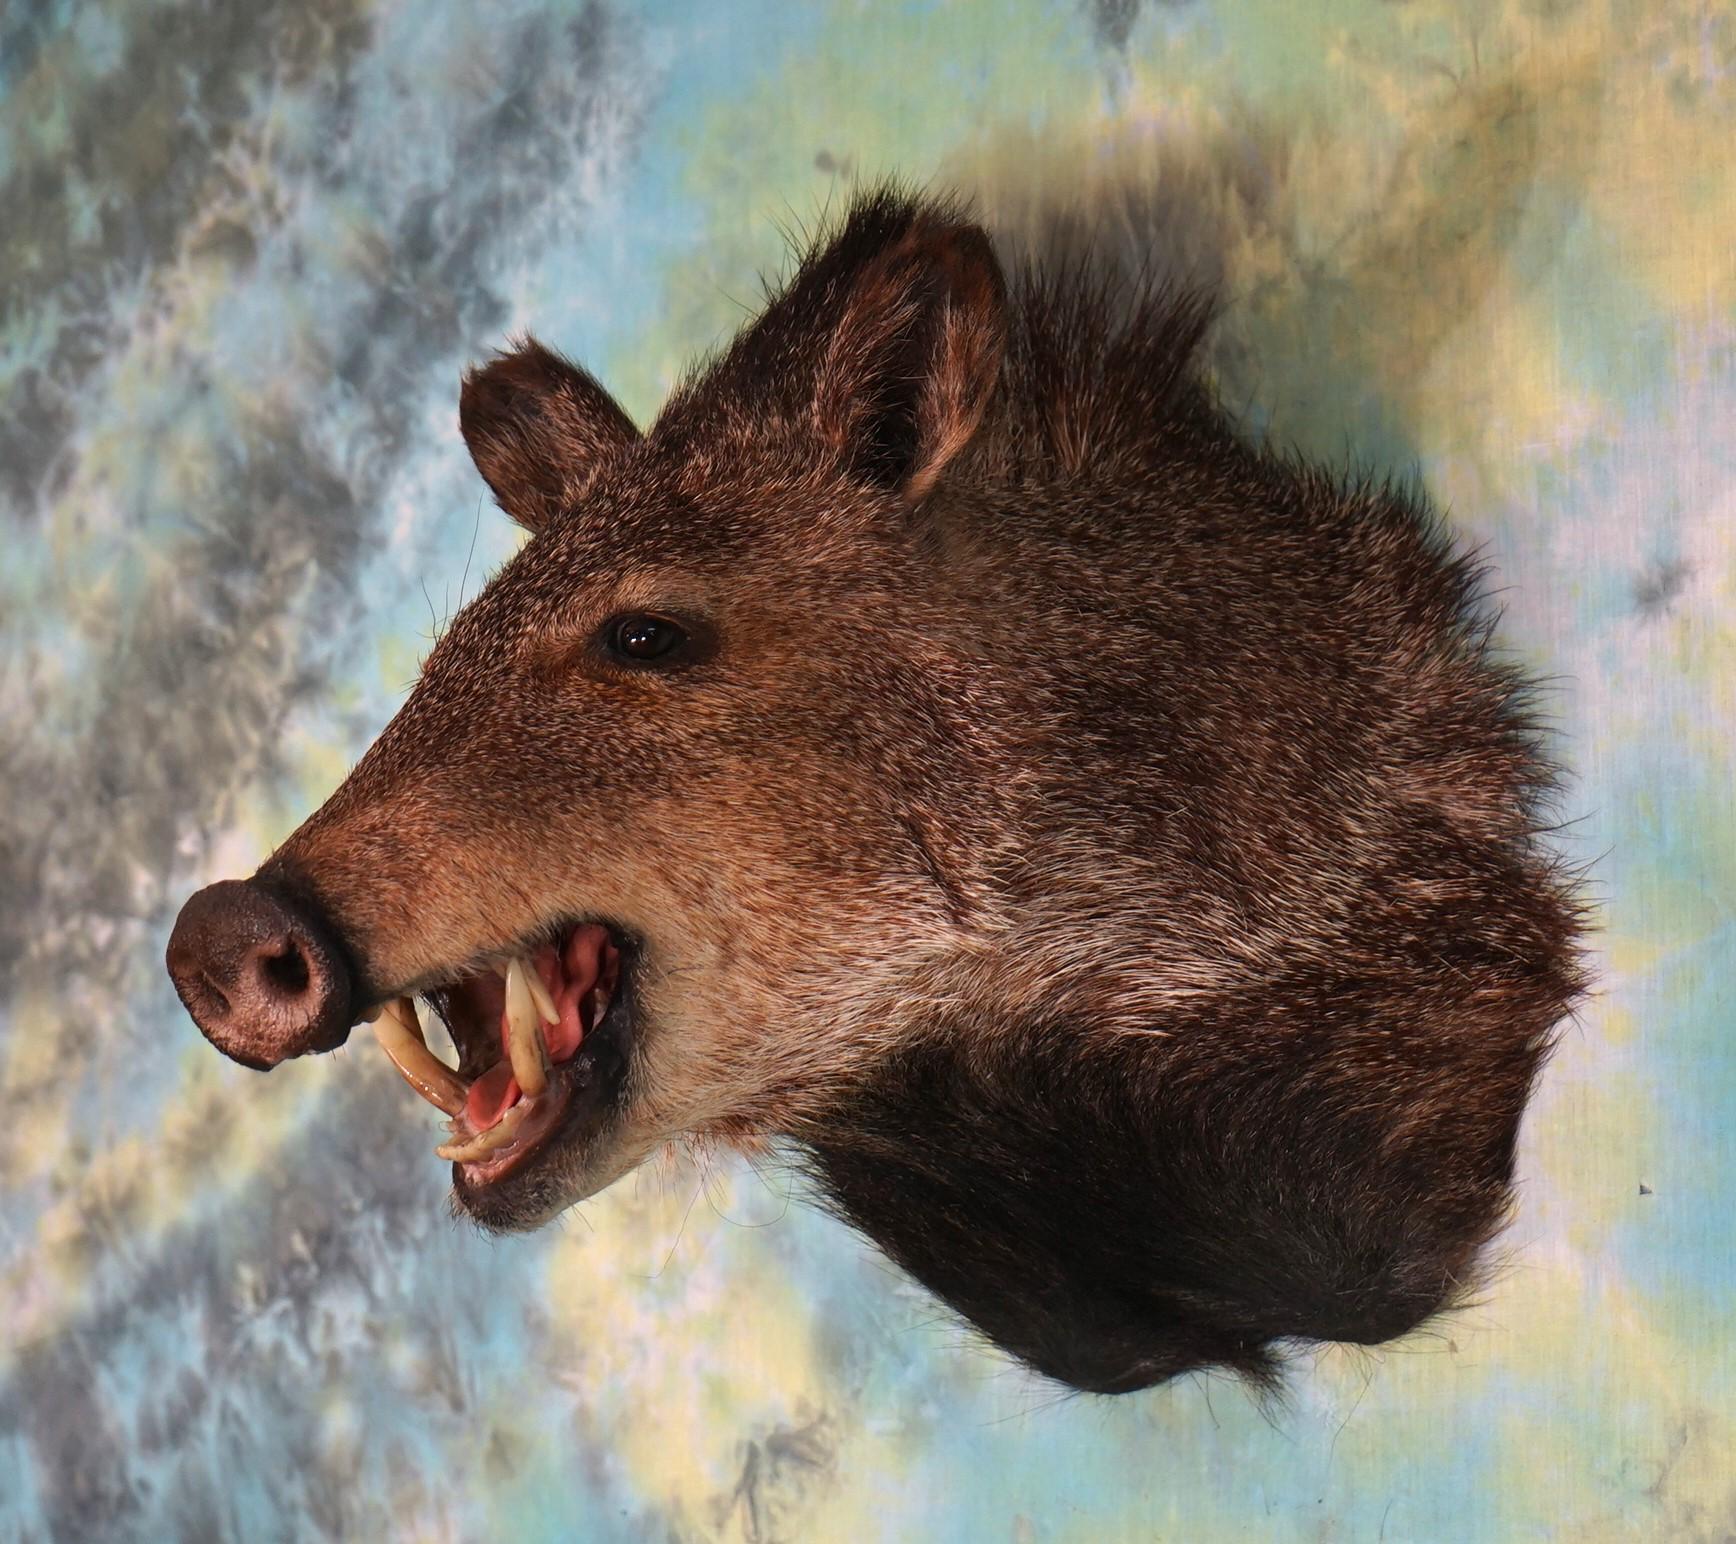 Javelina "Collared Peccary" Shoulder Taxidermy Mount